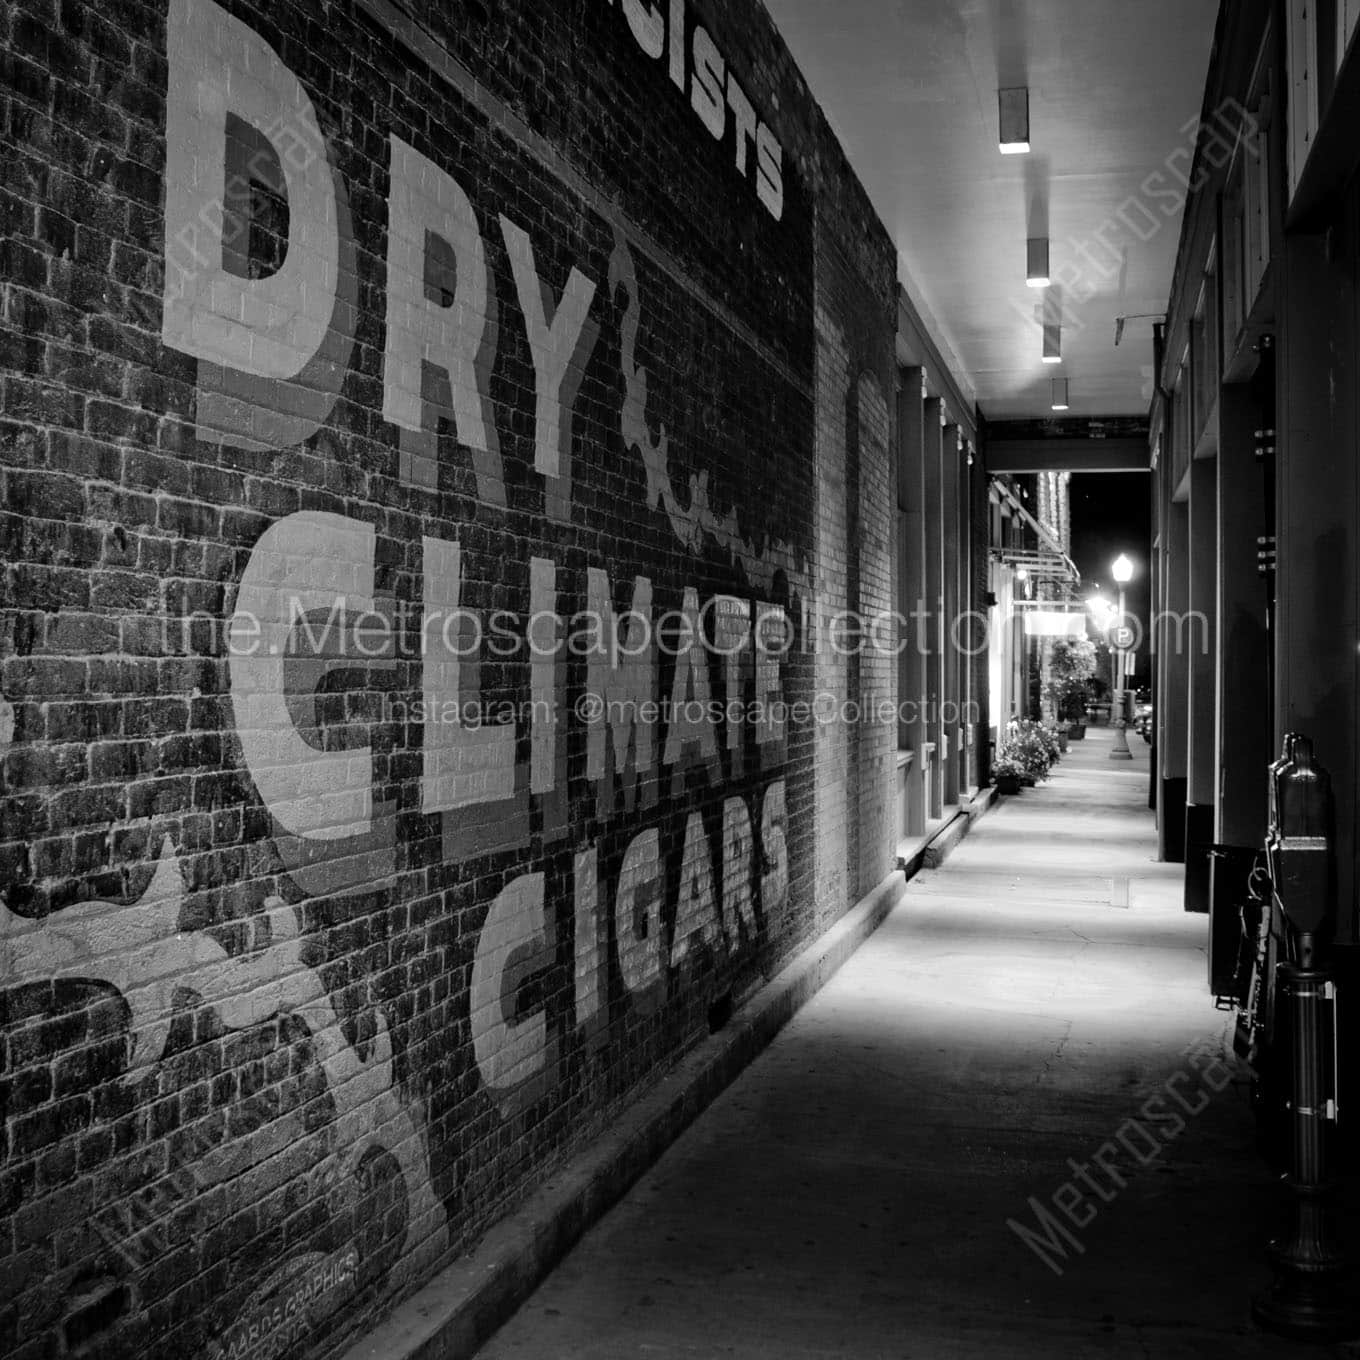 dry climate cigars wall mural downtown aspen Black & White Wall Art